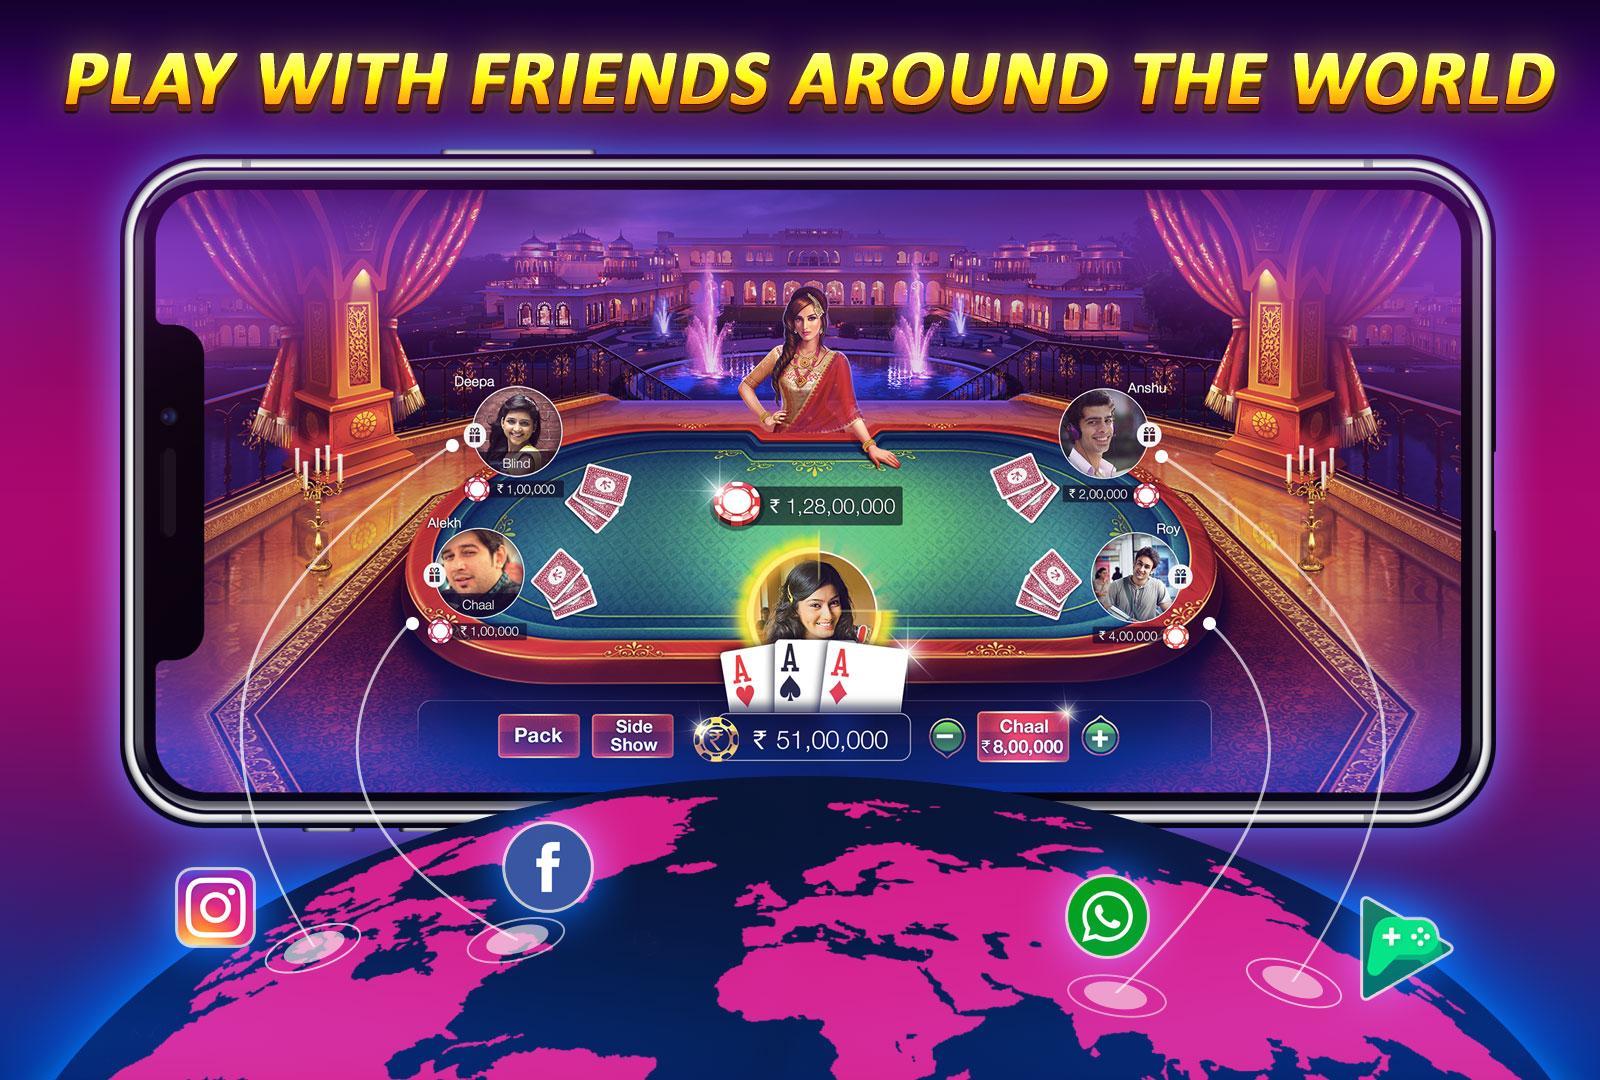 Teen Patti Gold for Android - APK Download - 